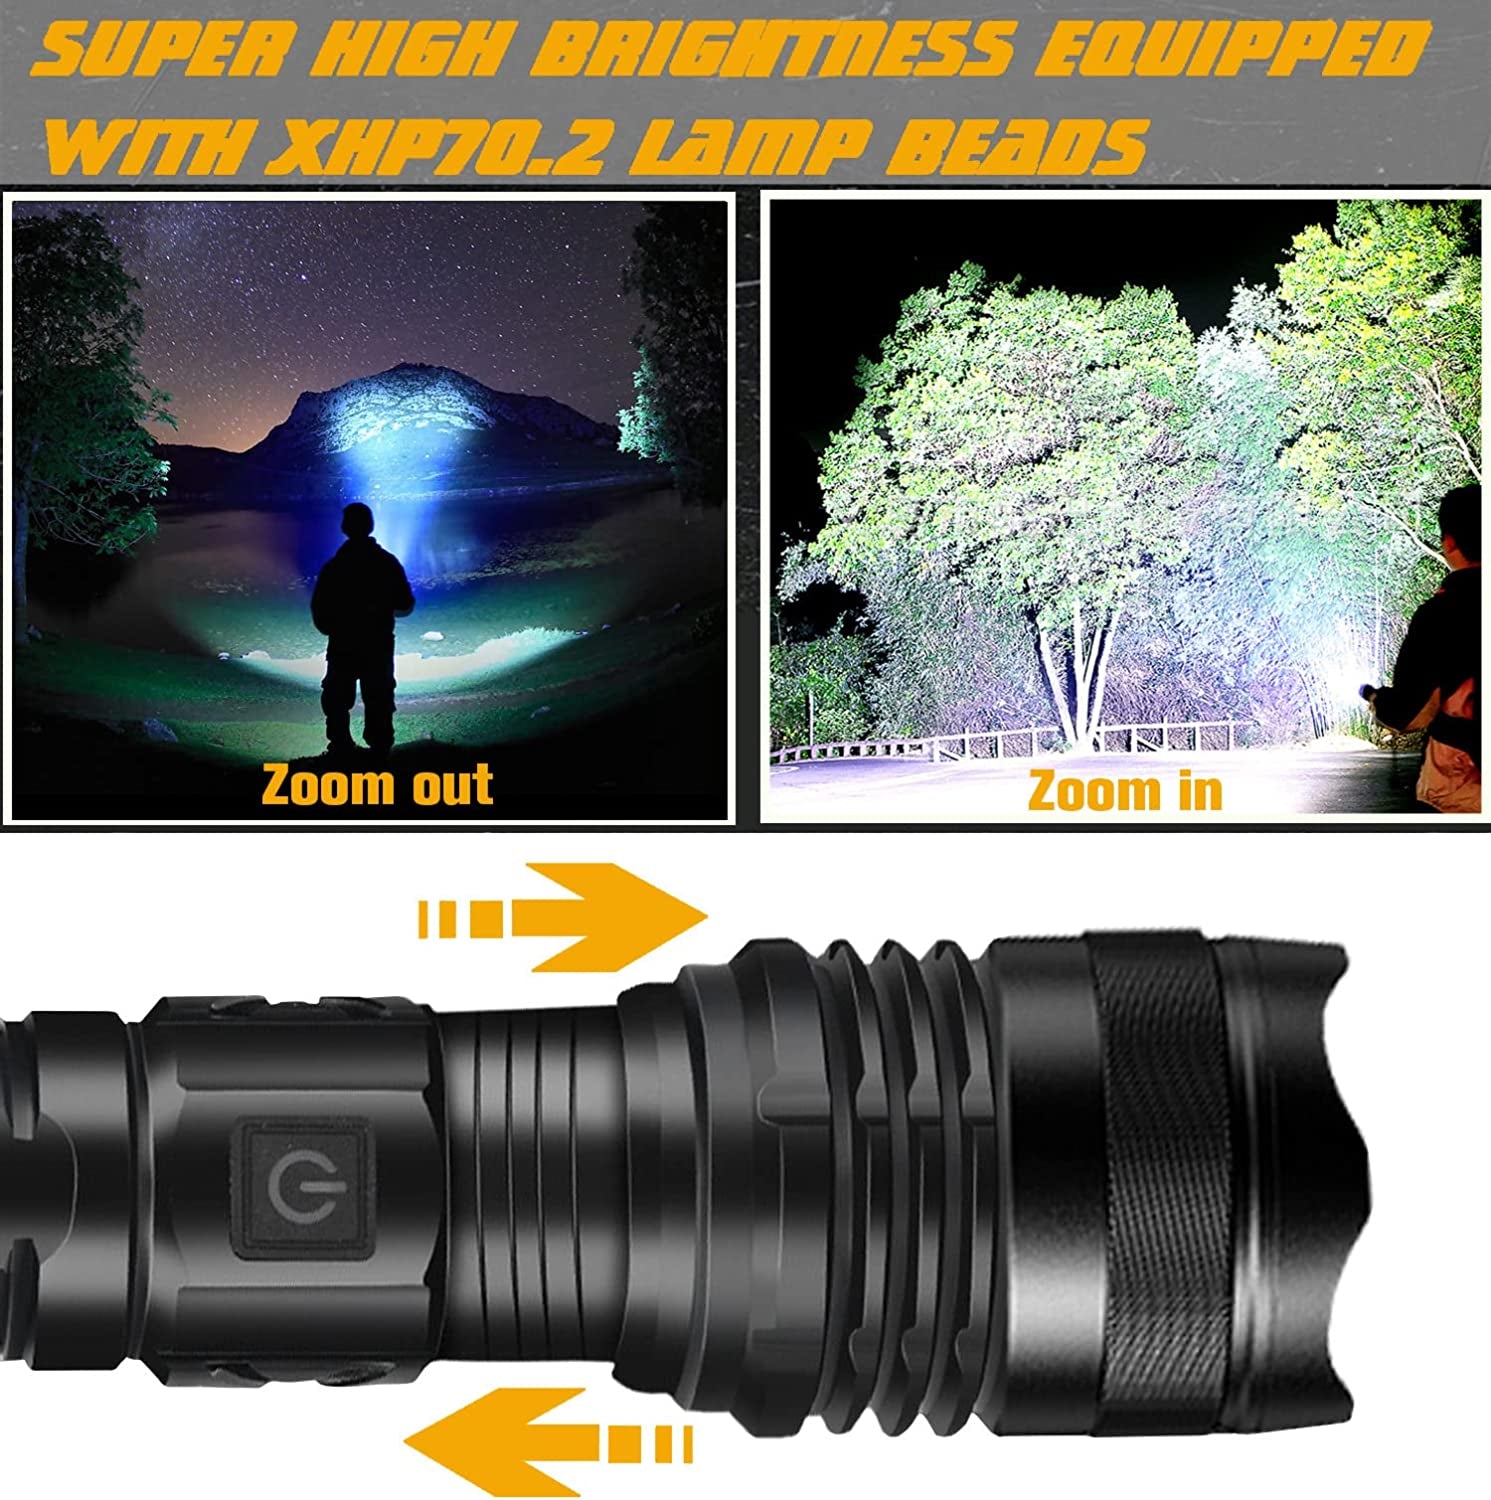 Rechargeable LED Flashlights High Lumens, 150000 Lumens Super Bright Tactical Handheld Flash Light, Powerful Emergency Linternas, Zoomable, Waterproof, Long Lasting, for Hiking Camping Gift